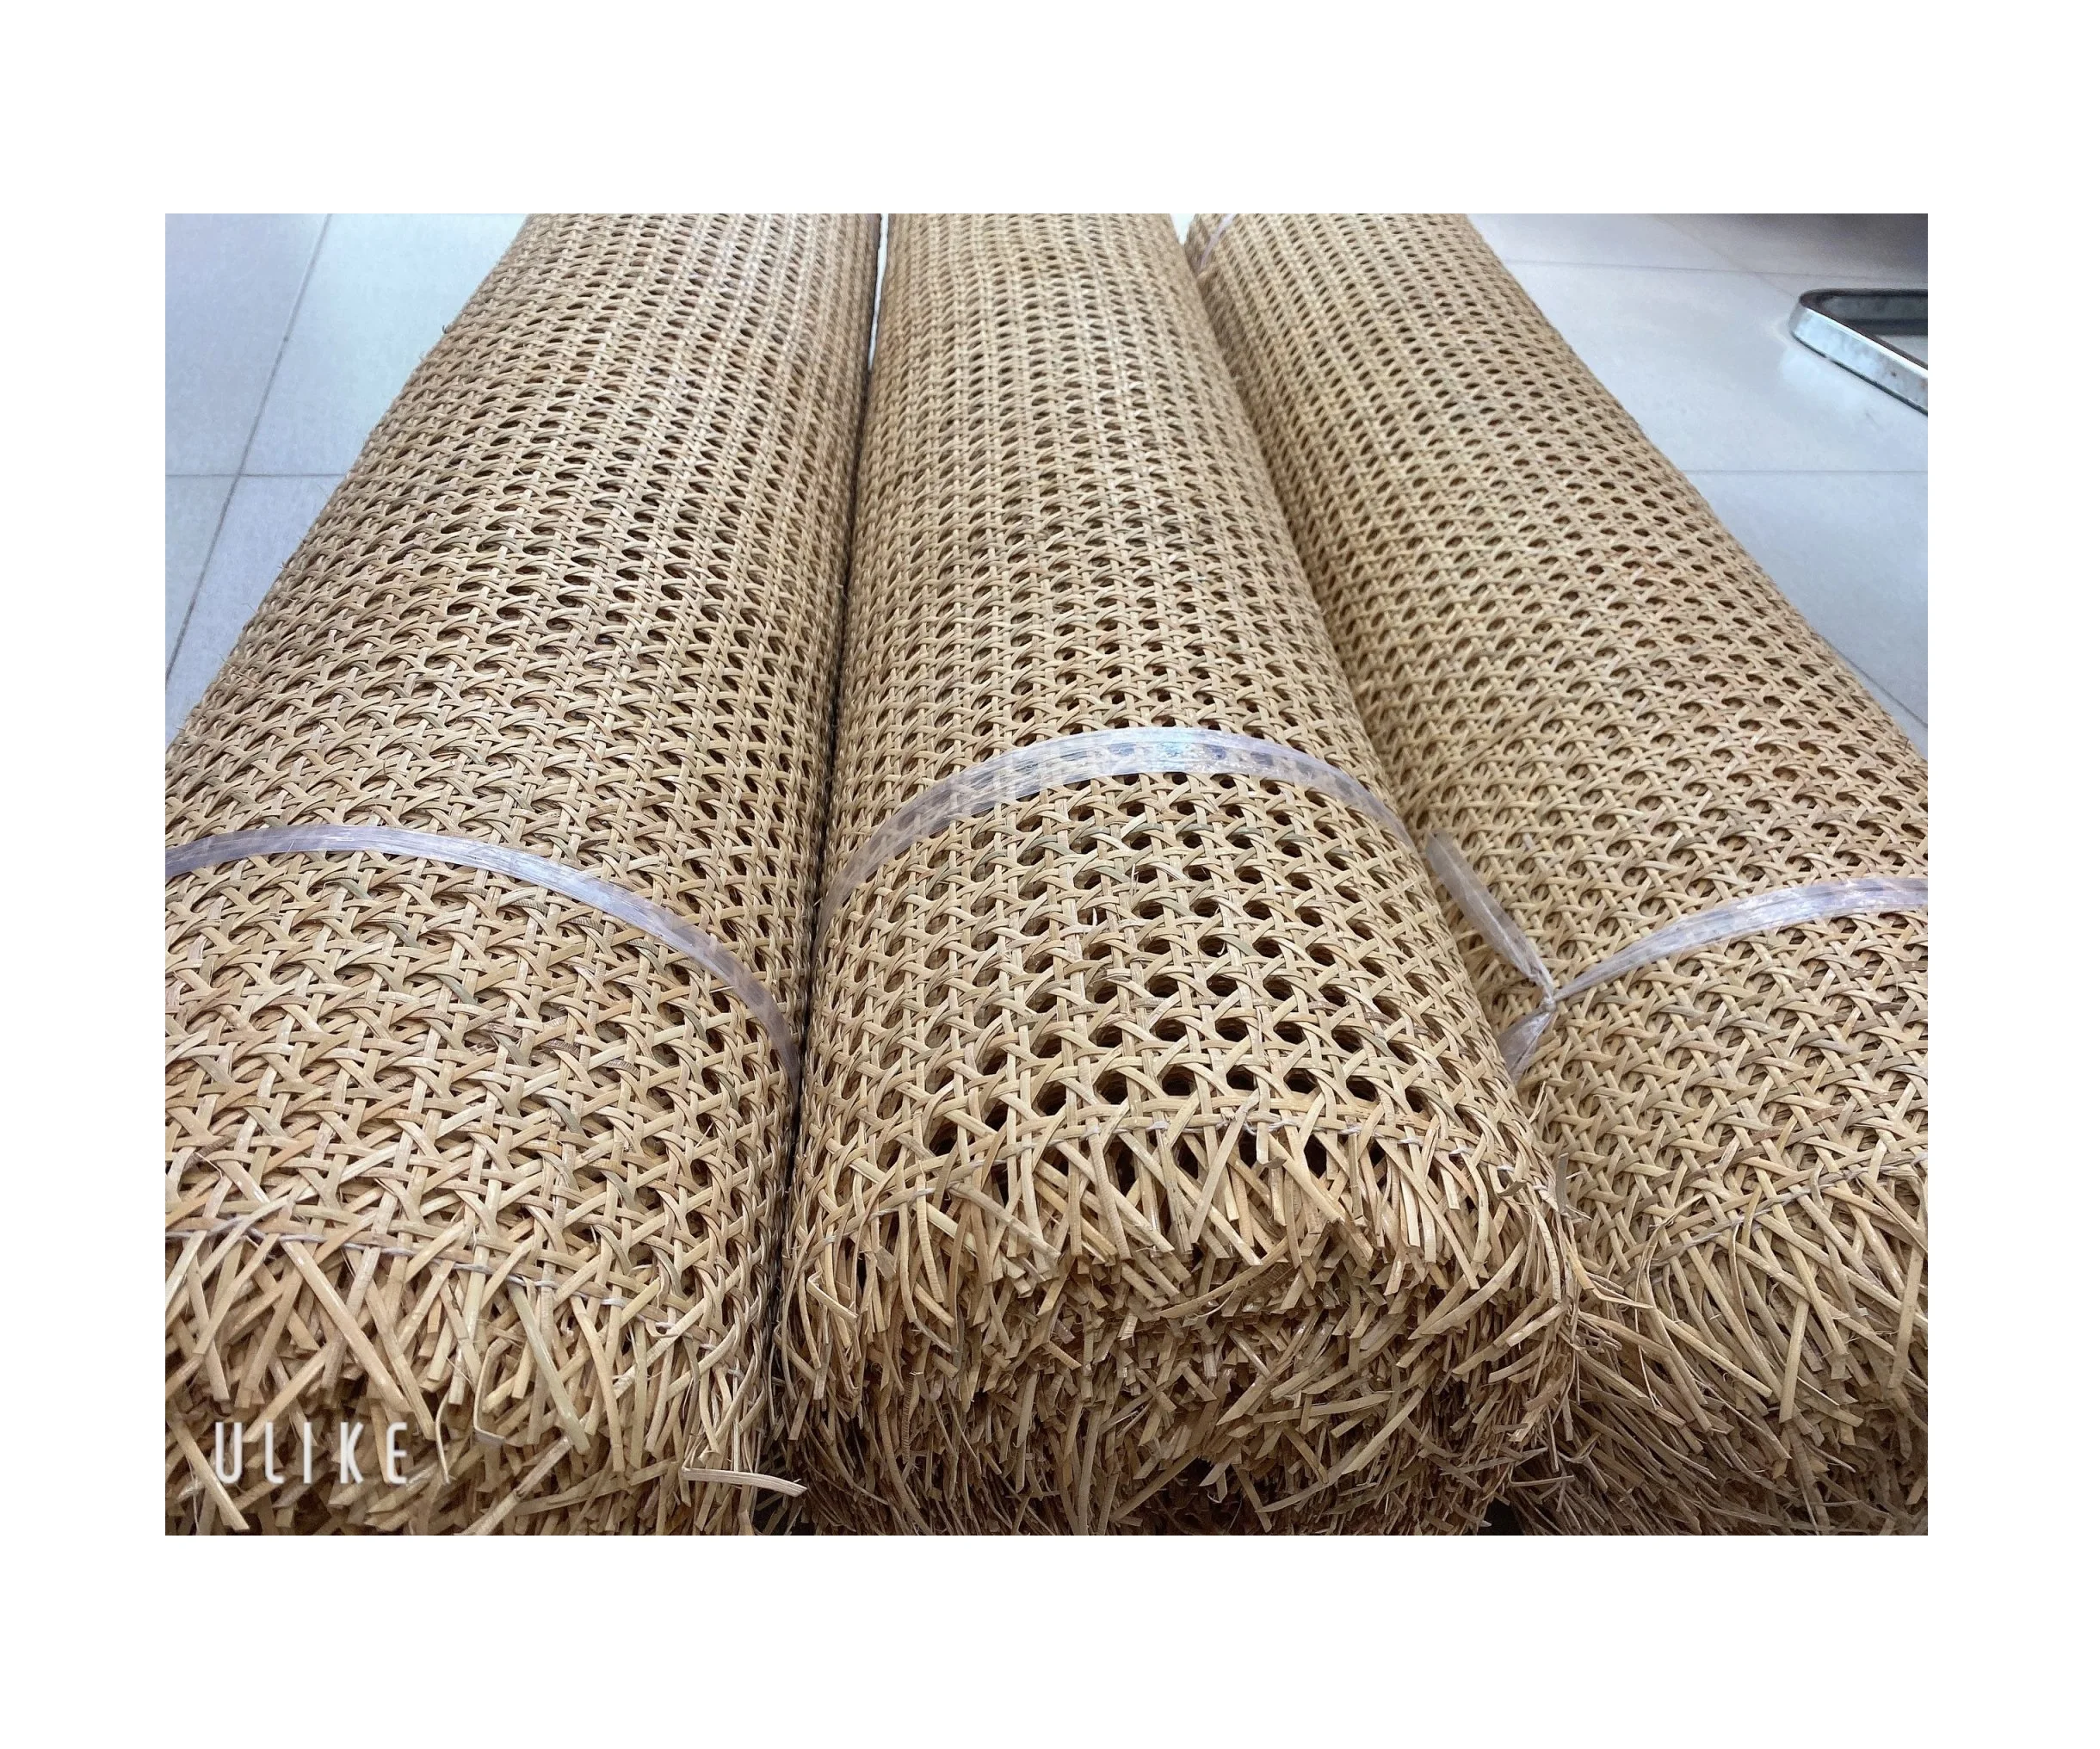 
Raw Material Open cane webbing roll for making chairs - Vietnam rattan cane mesh - Weave Rattan cane webbing for furniture 